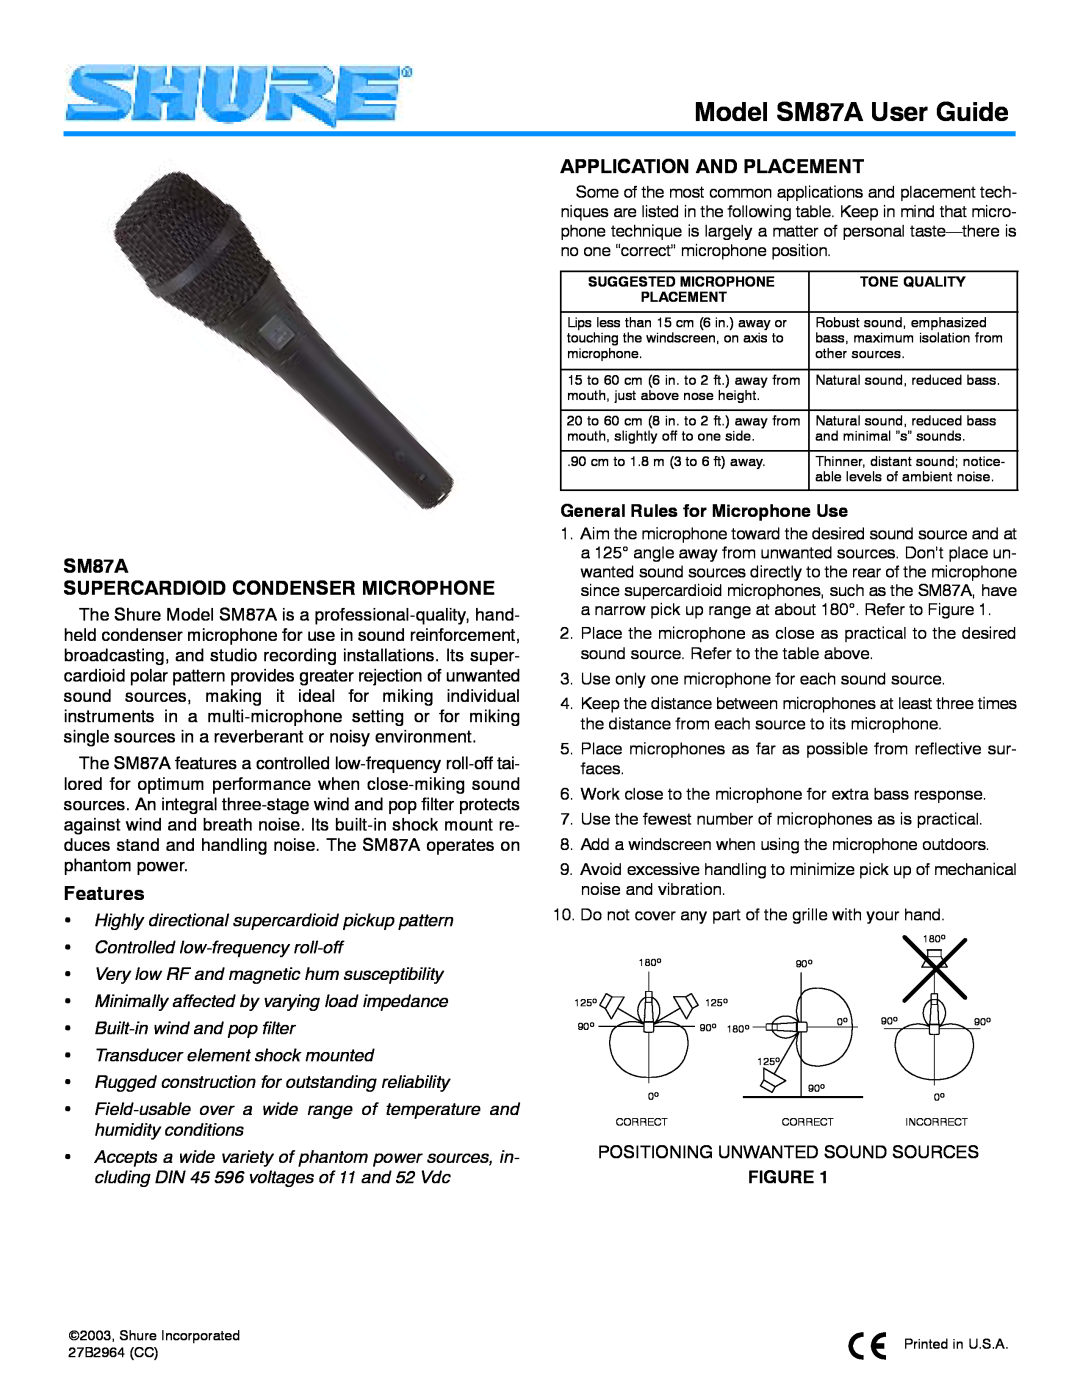 Shure manual SM87A SUPERCARDIOID CONDENSER MICROPHONE, Features, Application And Placement, Model SM87A User Guide 